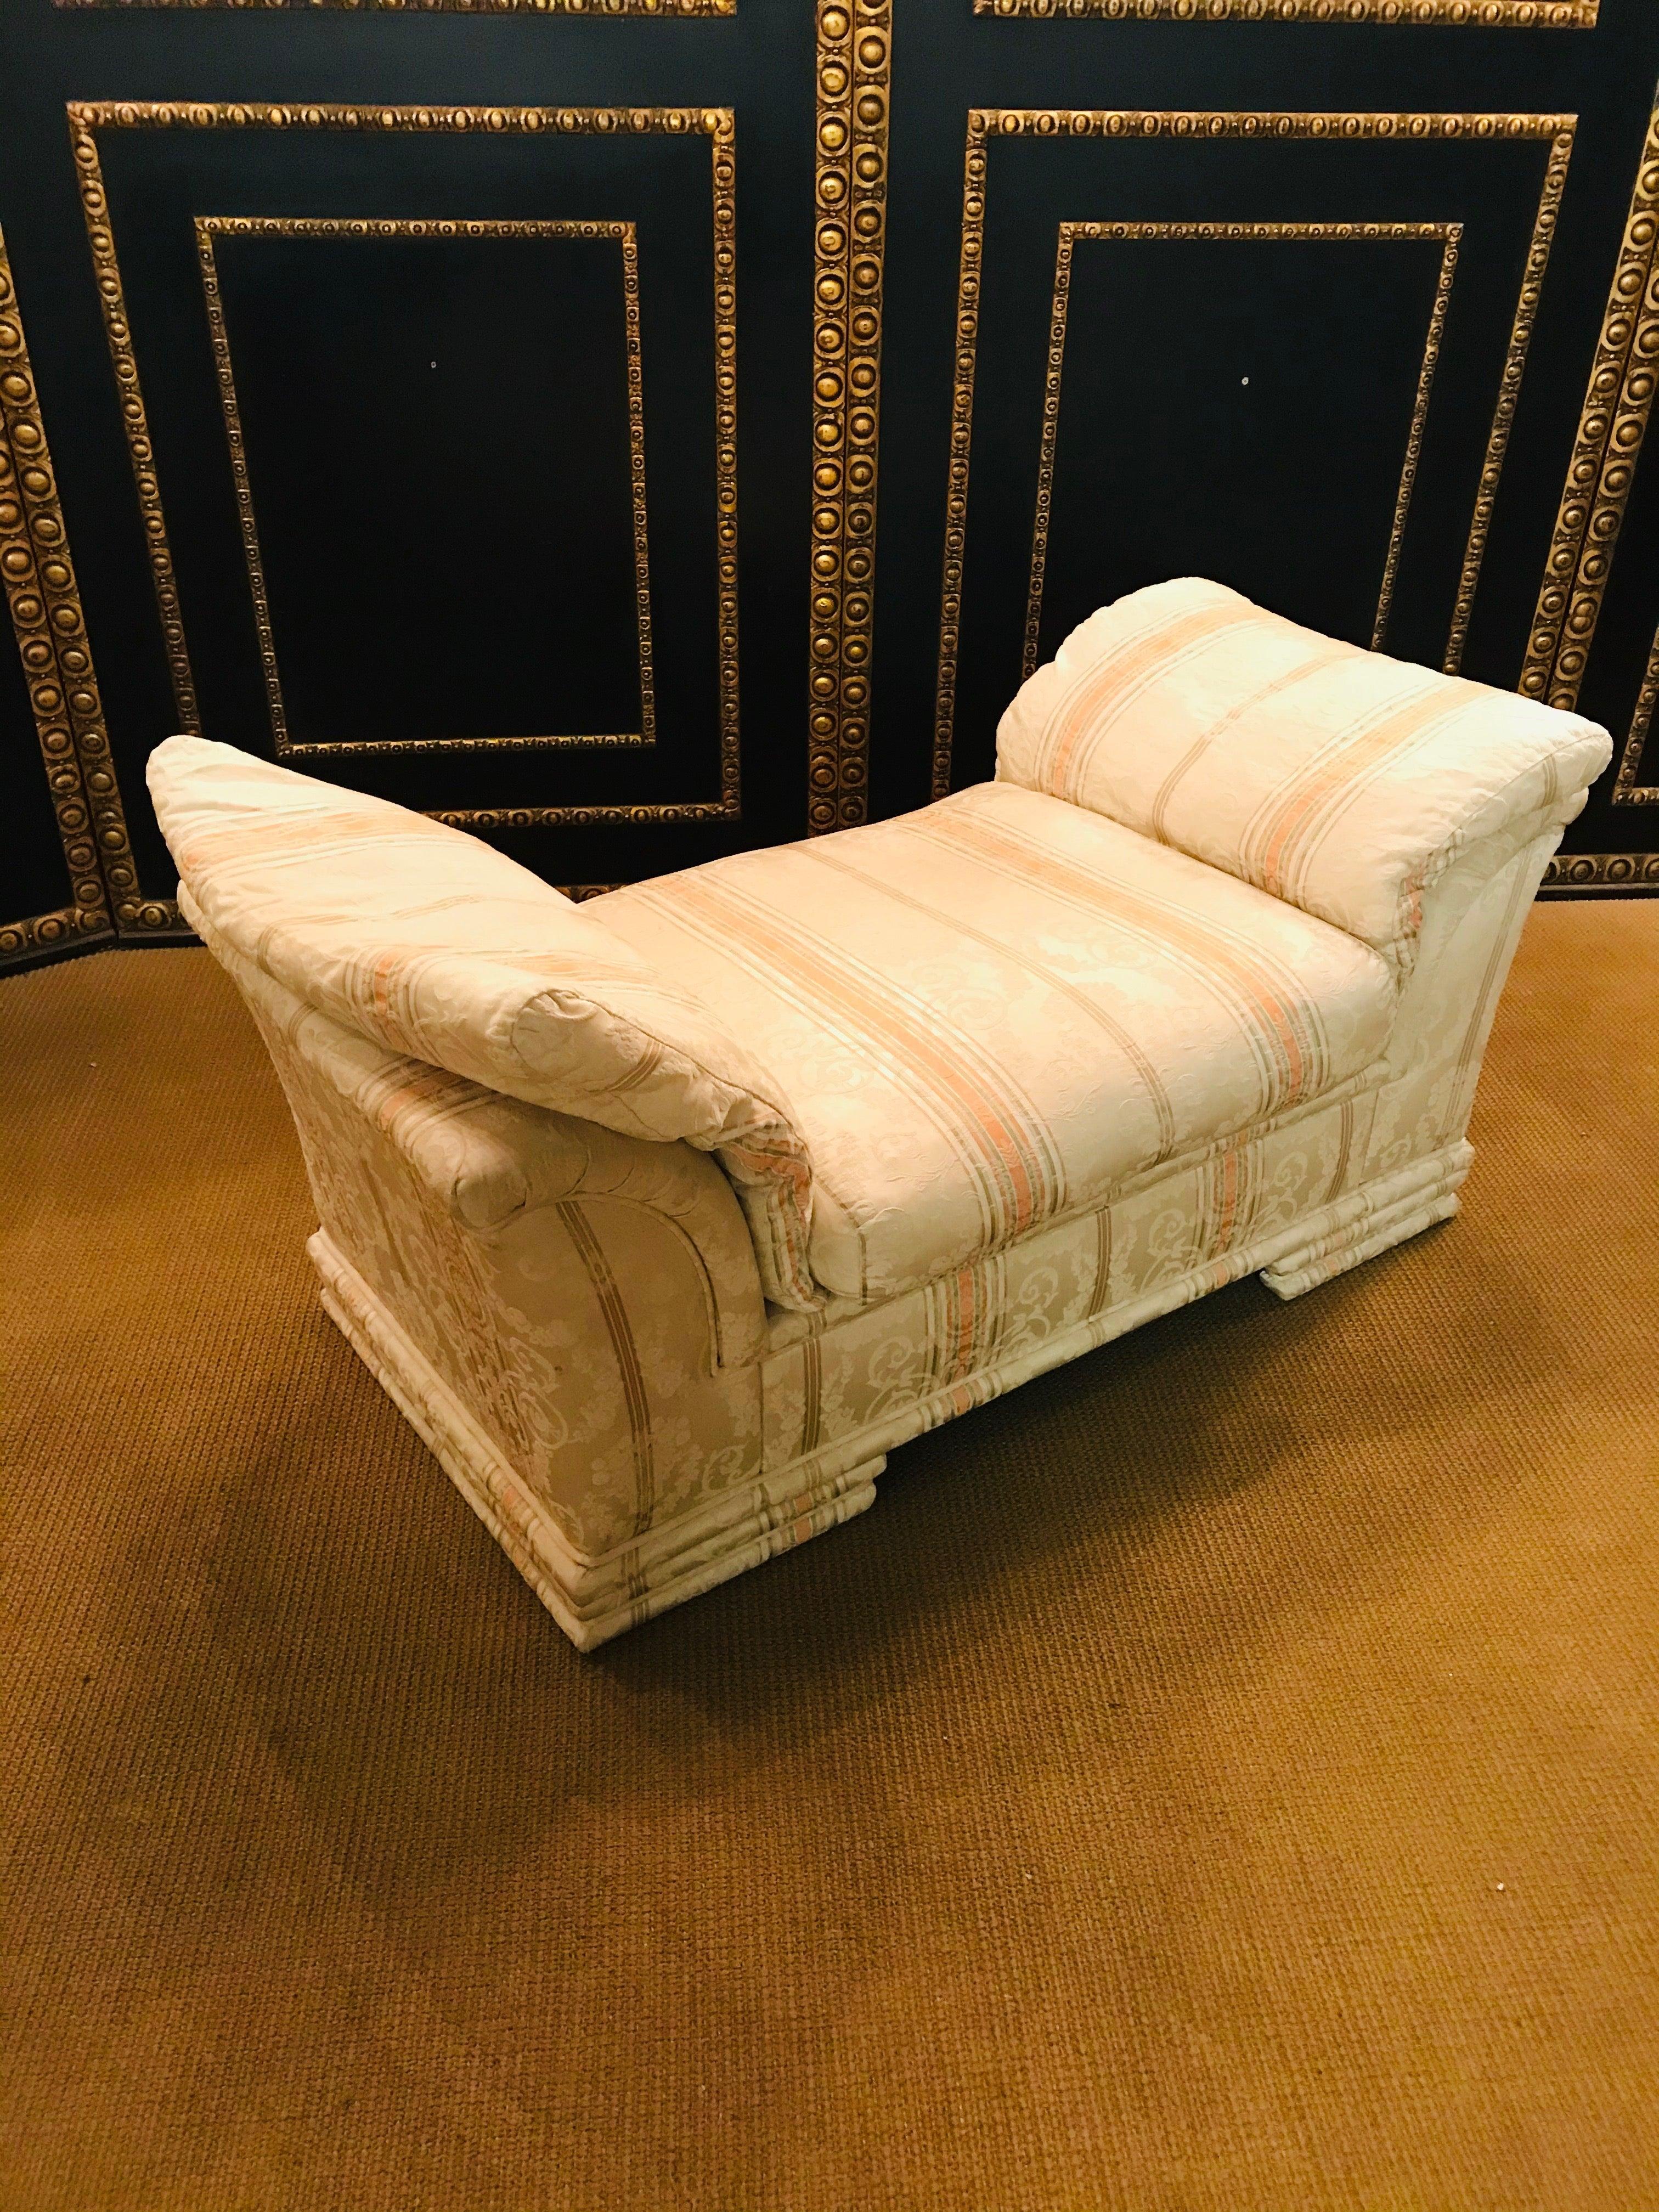 Very High-Quality Couch Set from the Bielefeld Workshops with Baroque Patterns 12